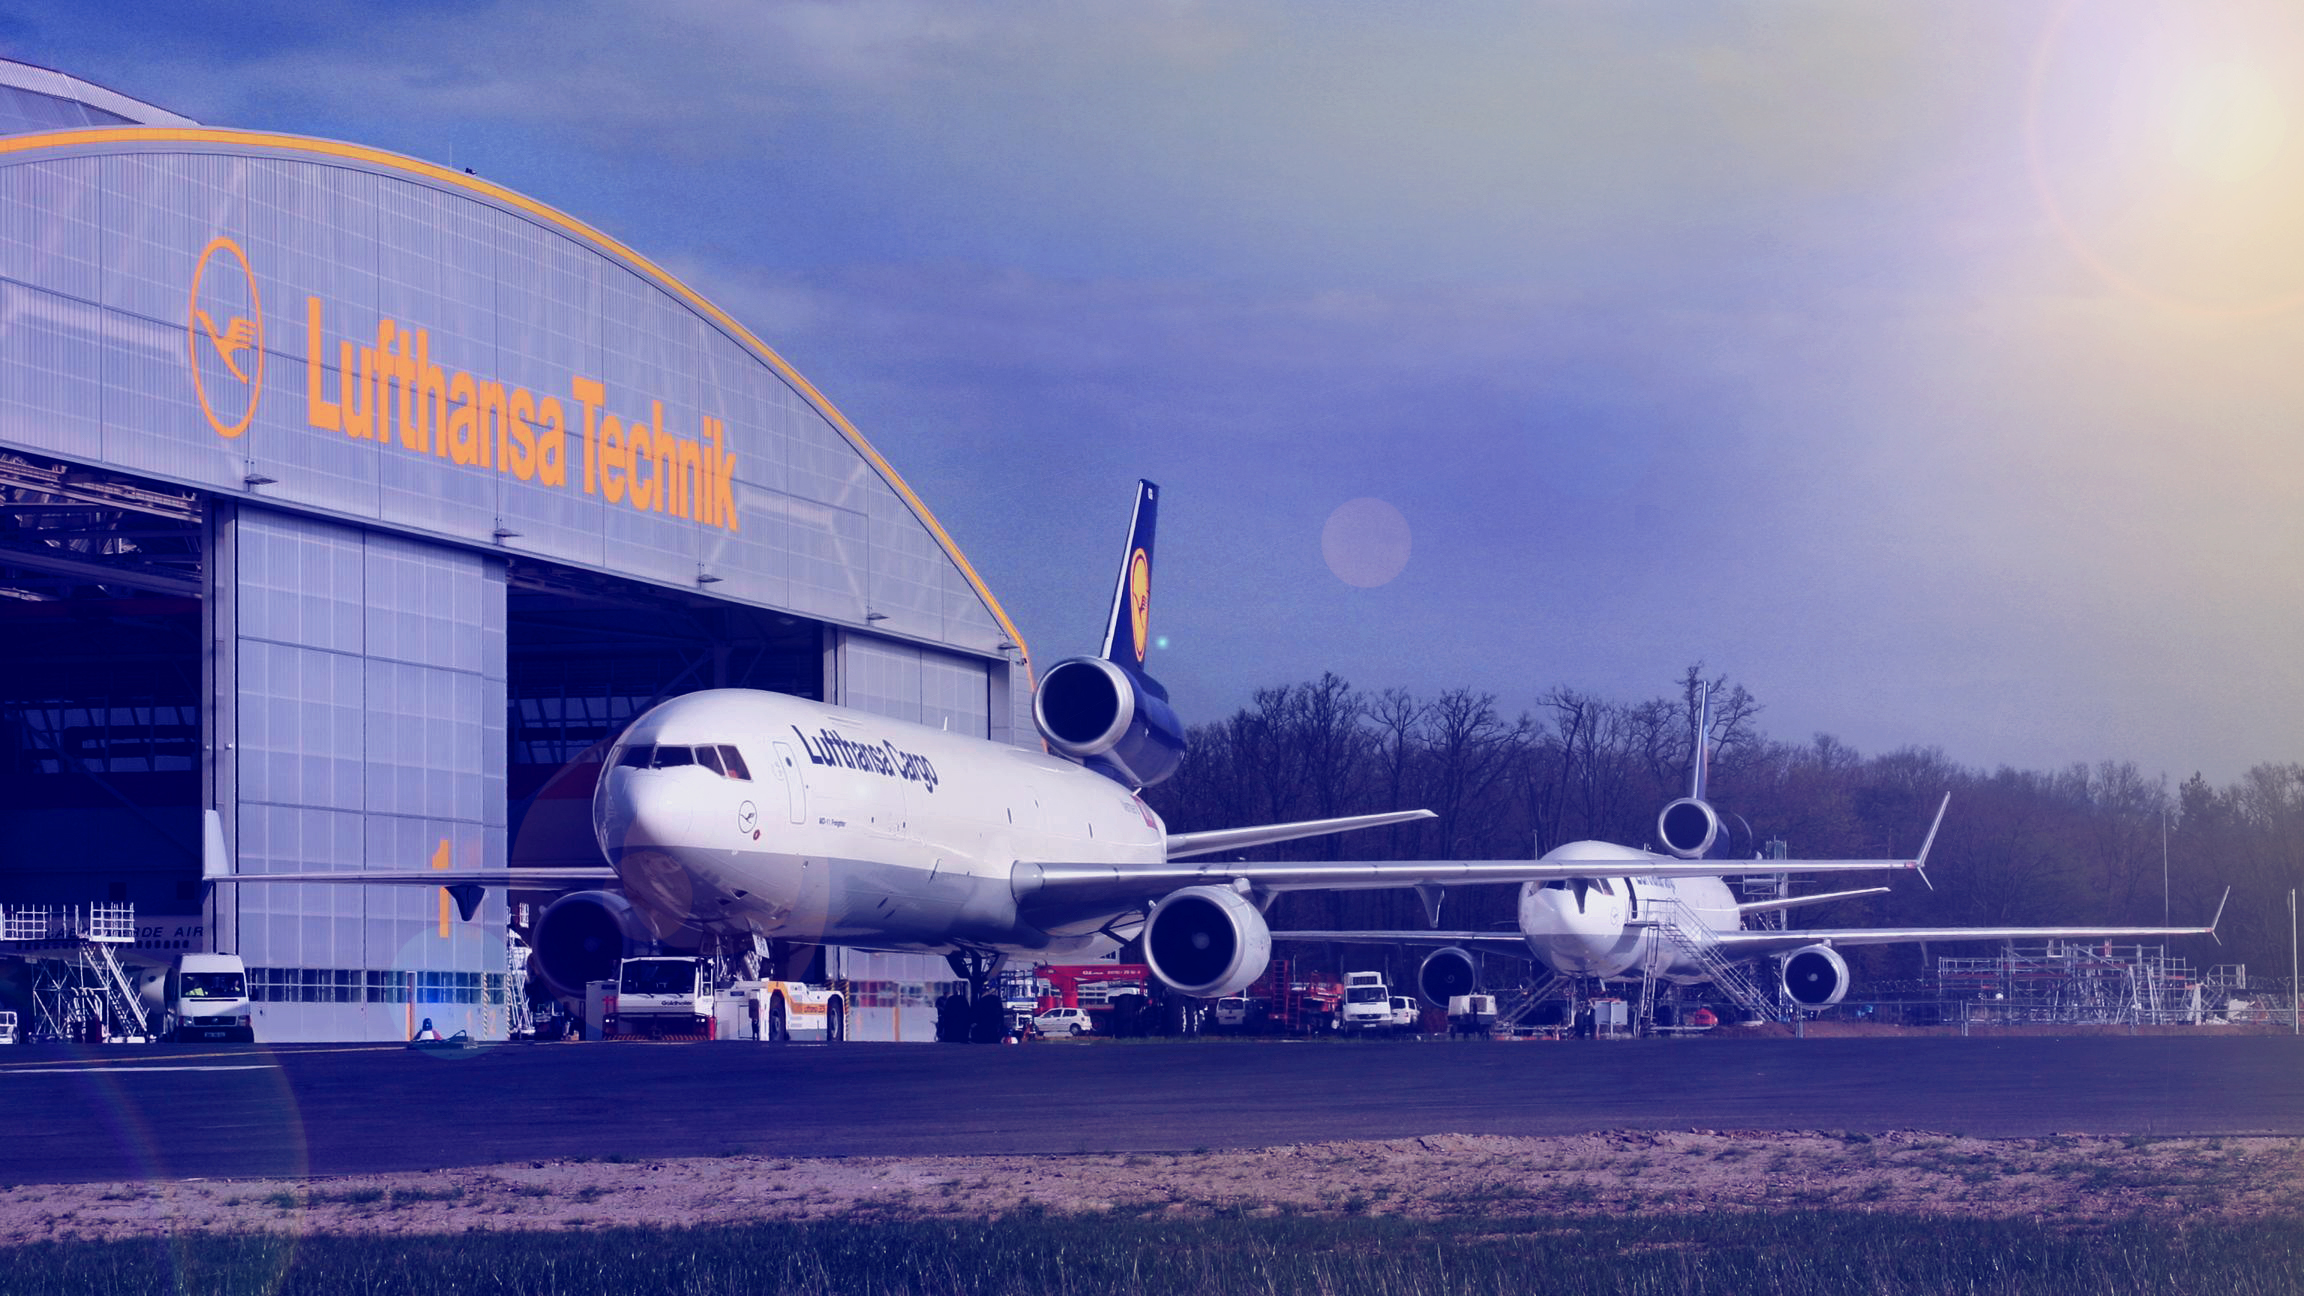 Biggest downfall at Lufthansa that says aviation won't improve for years